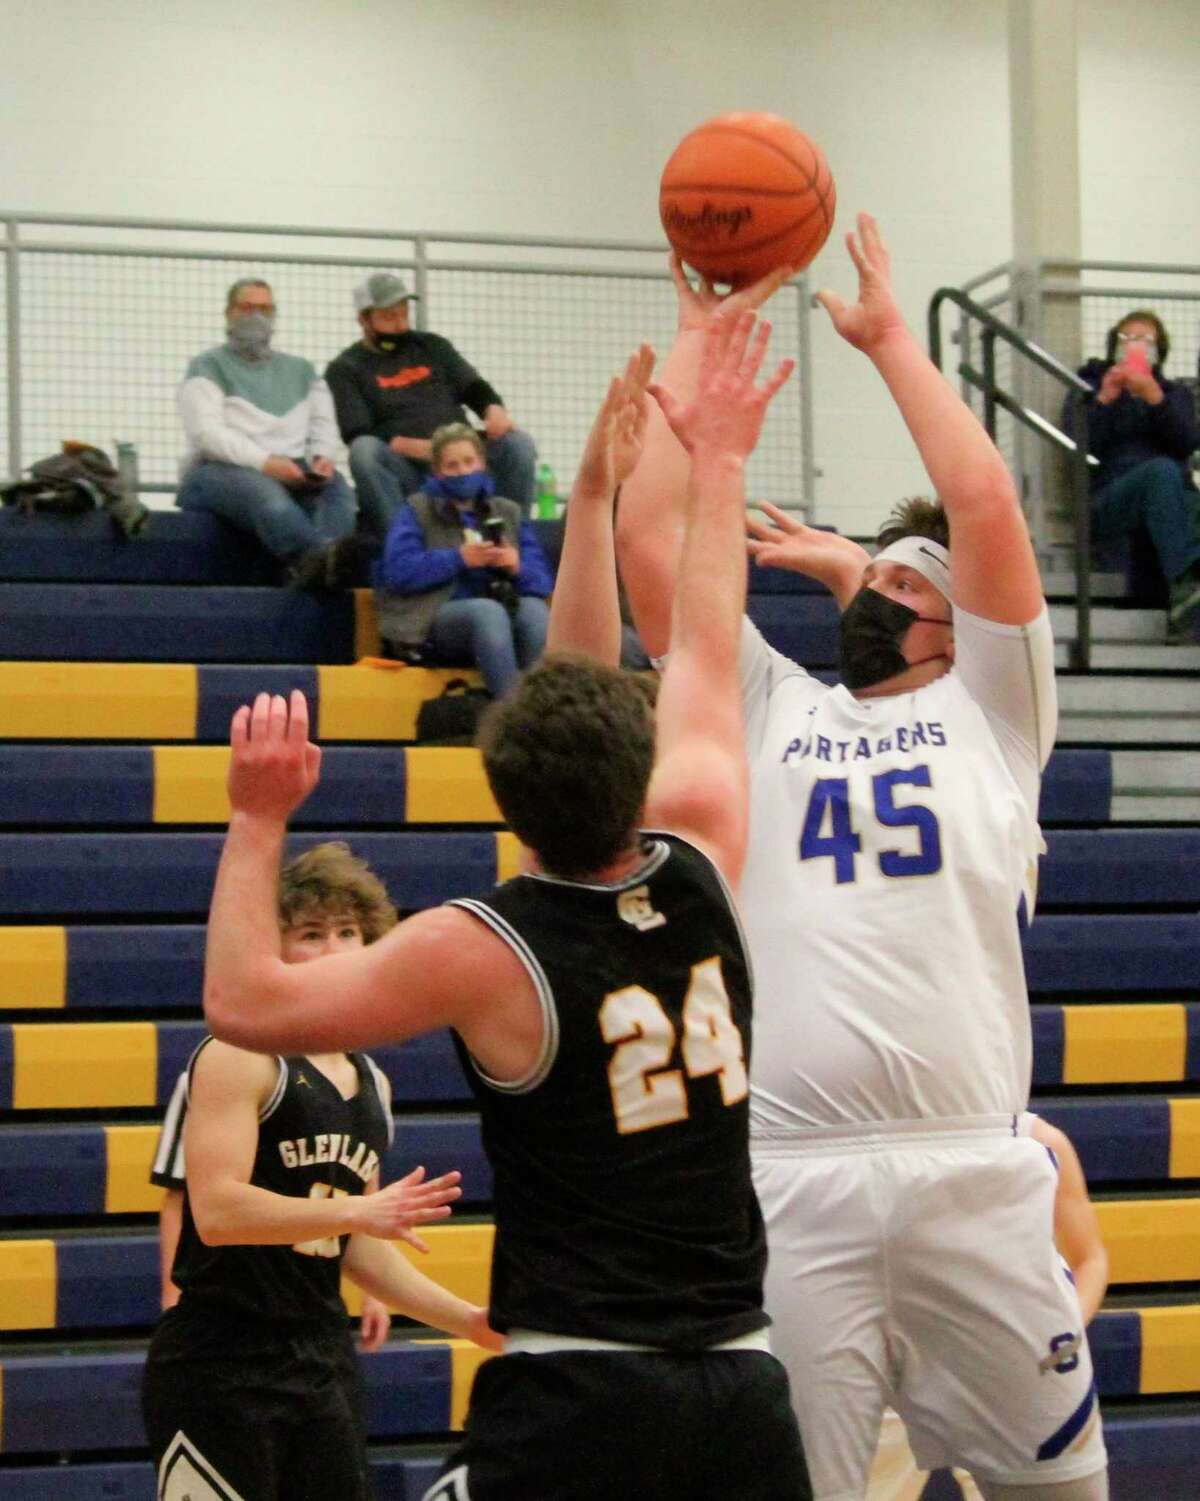 Ben Falk elevates over the Glen Lake defender for a shot on his way to a team-high 12 points on Feb. 25. (Robert Myers/News Advocate)